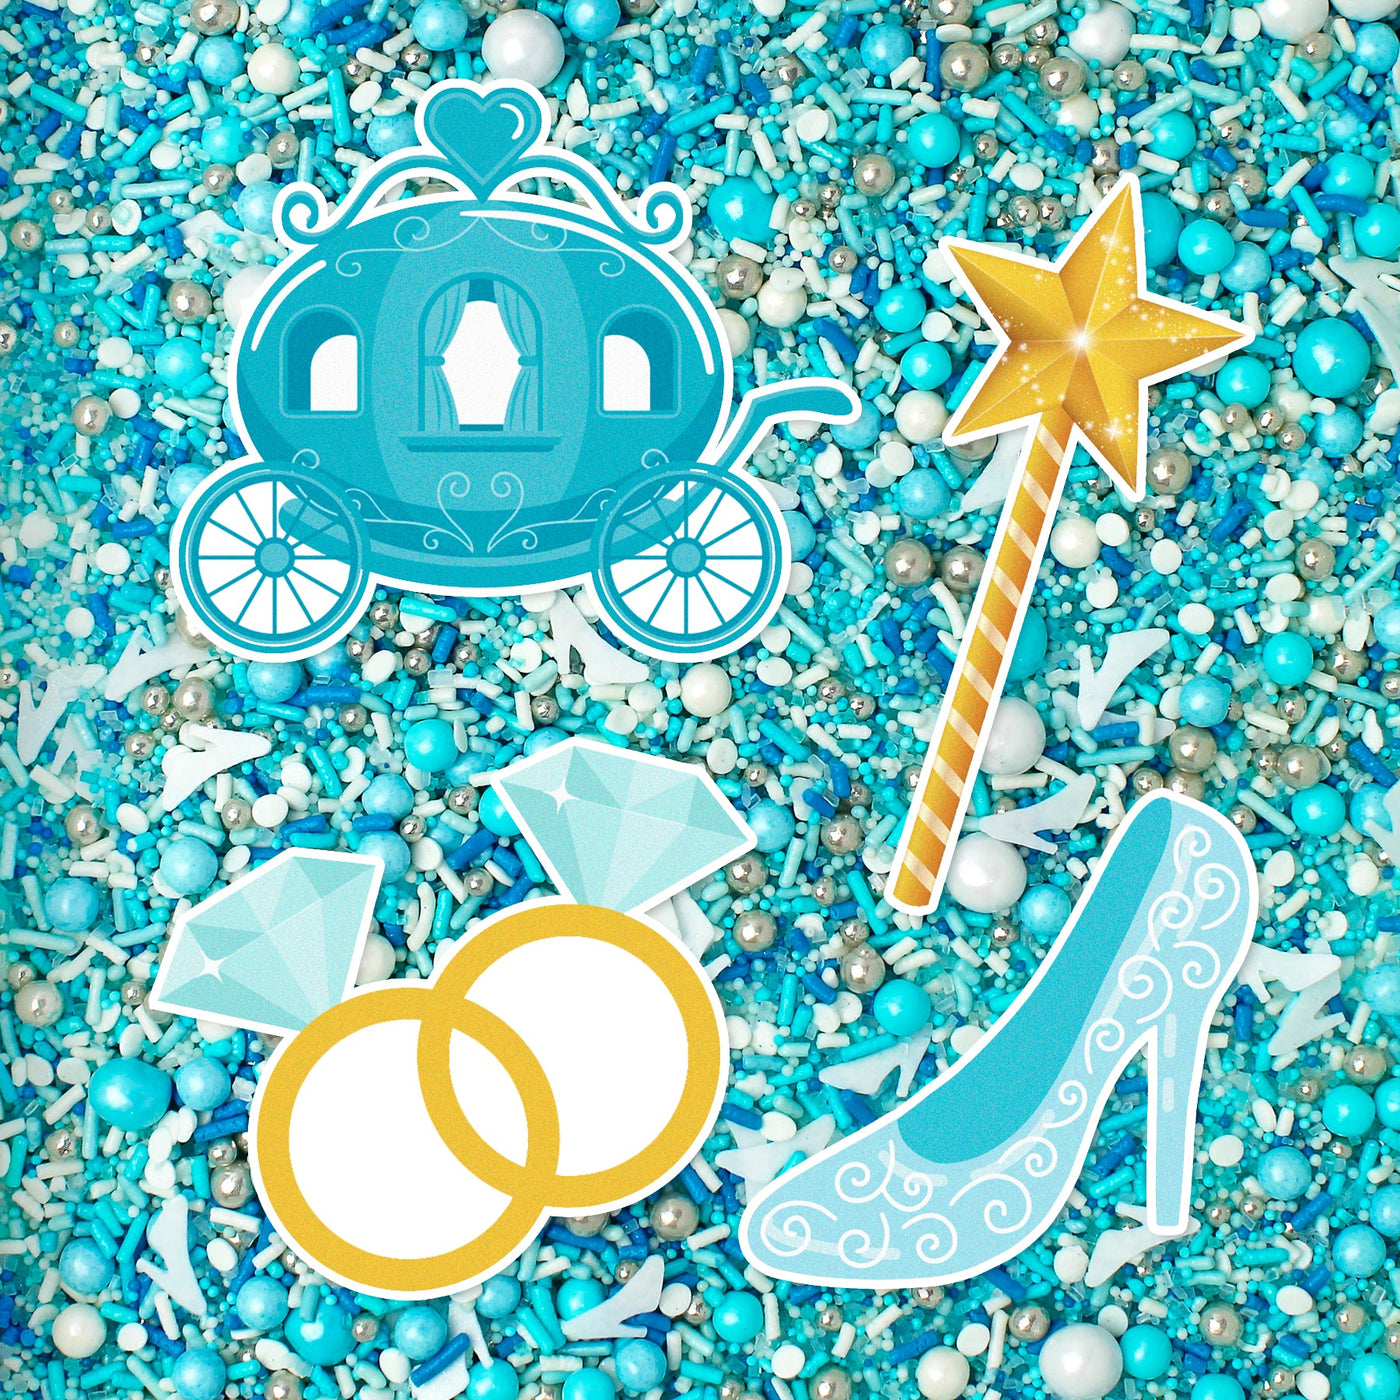 Edible Cupcake Toppers for Glass Slipper